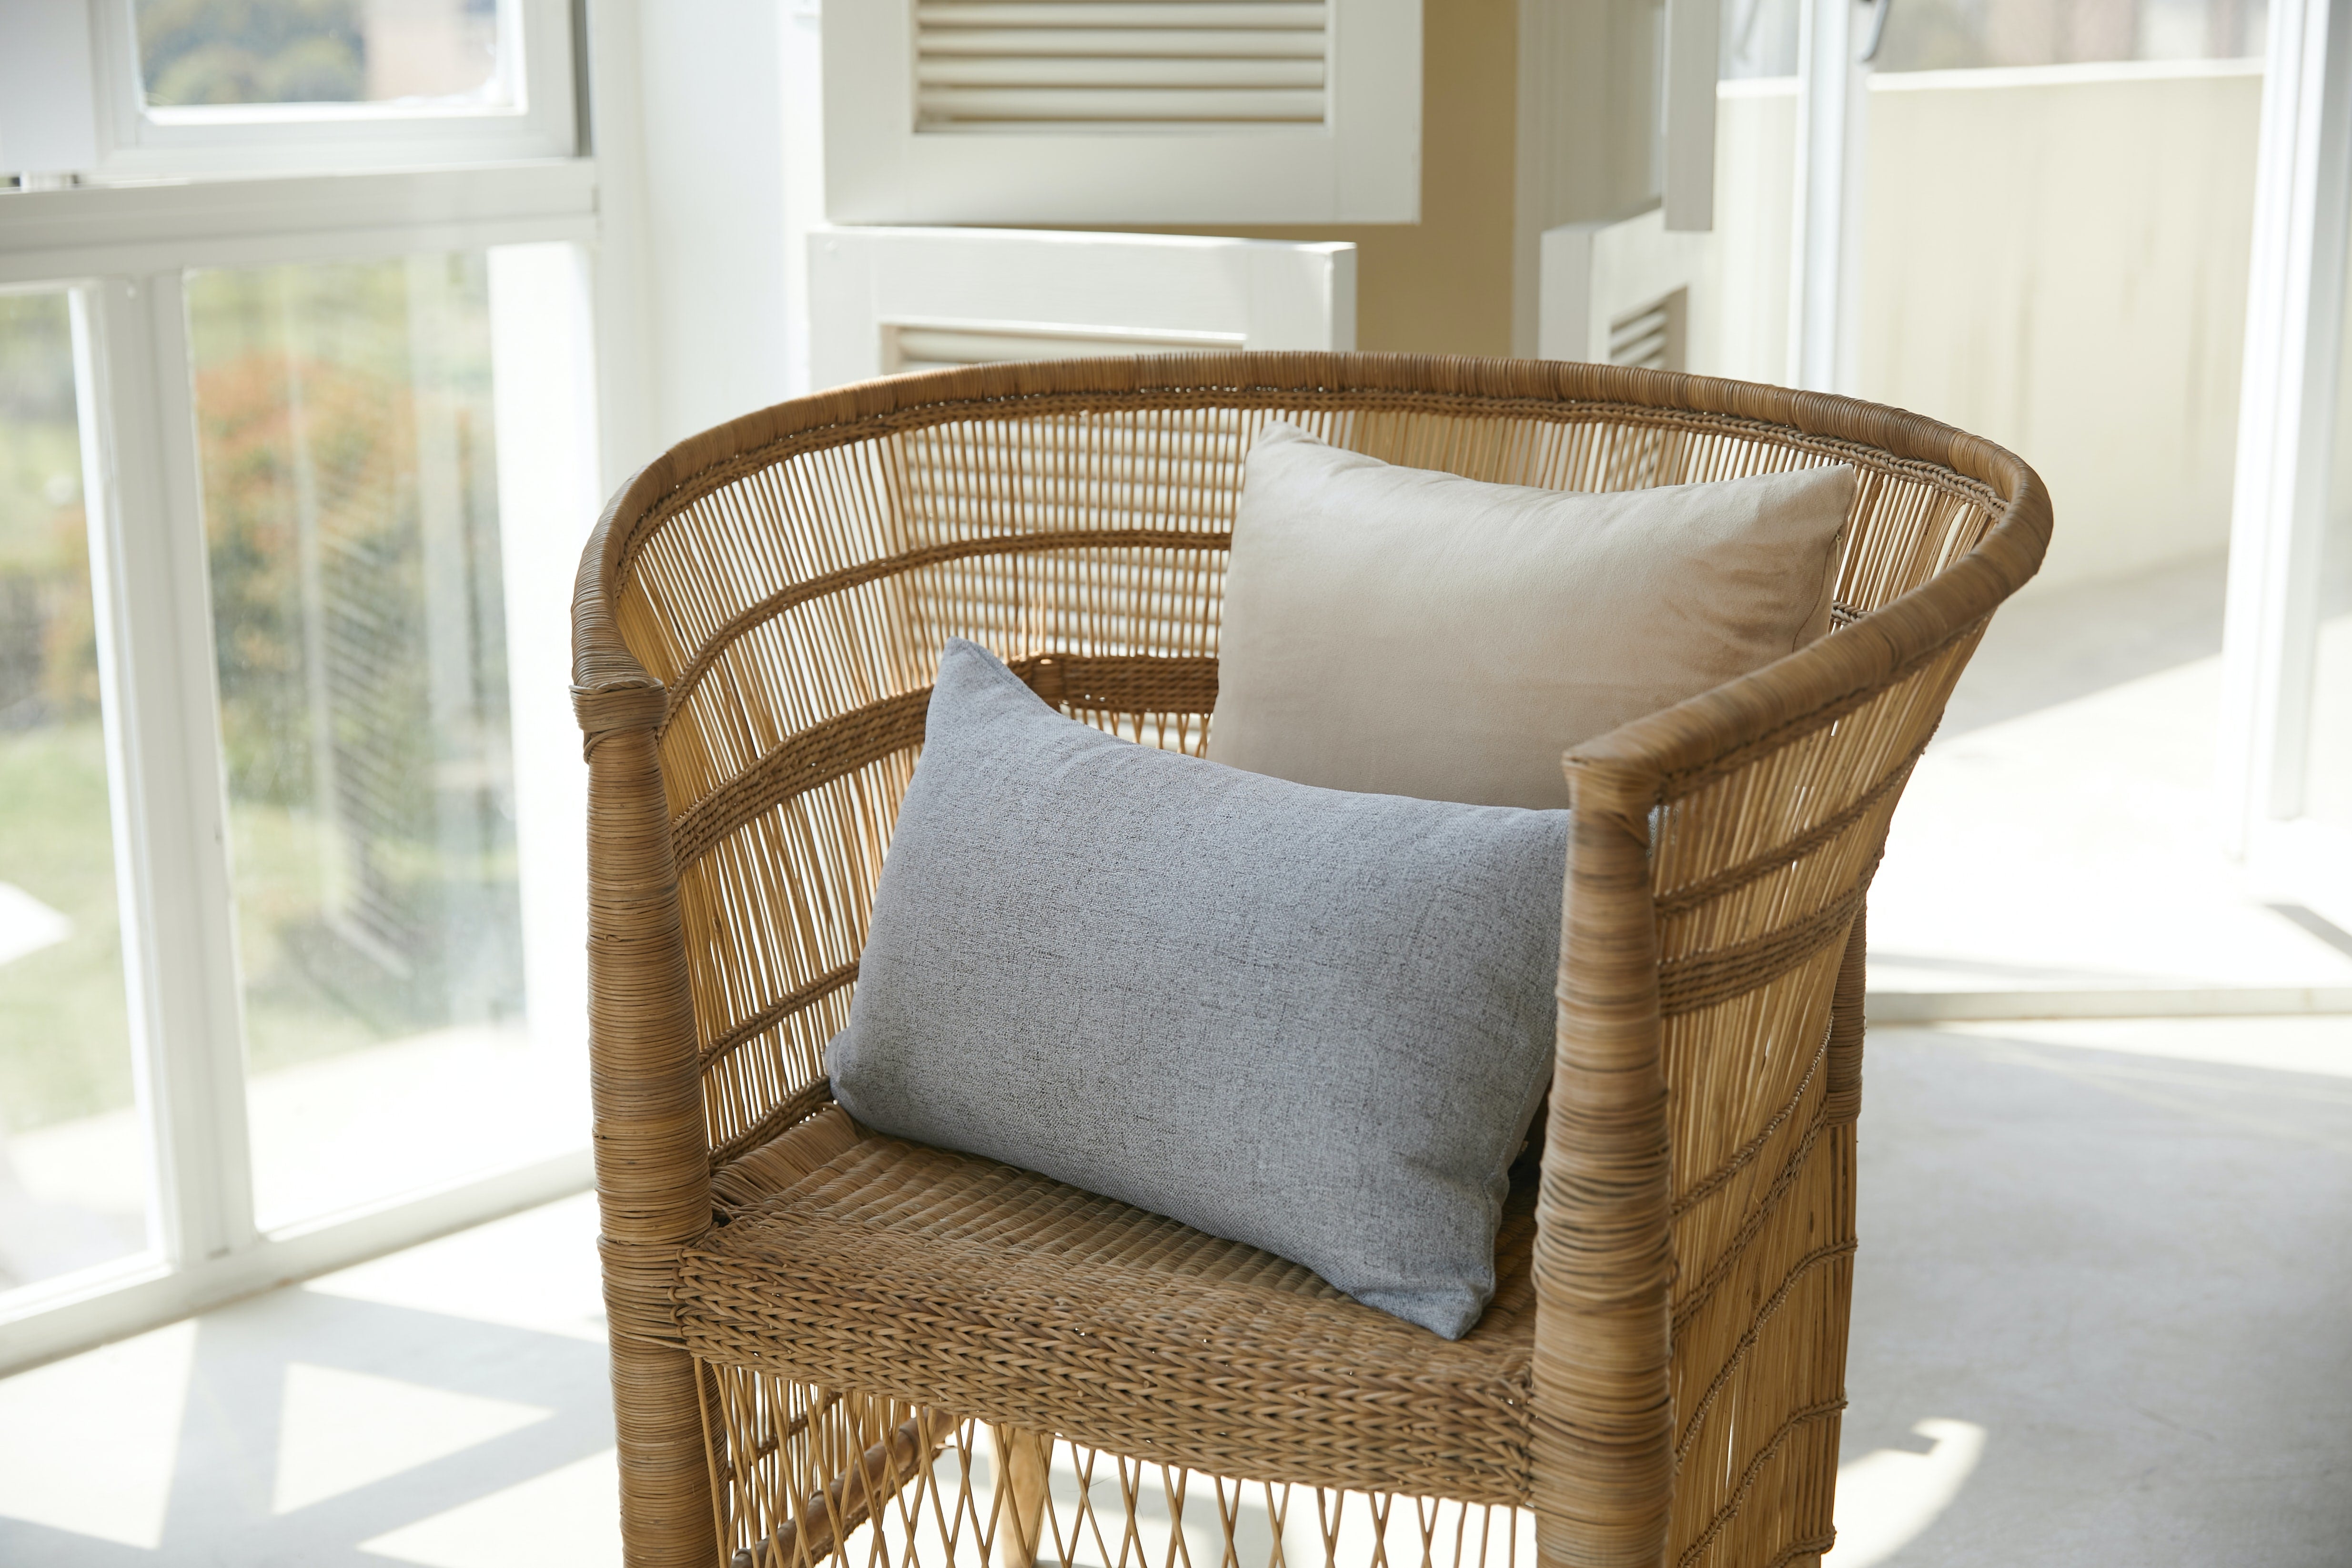 Rattan - A Sustainable Natural Alternative for Your Home